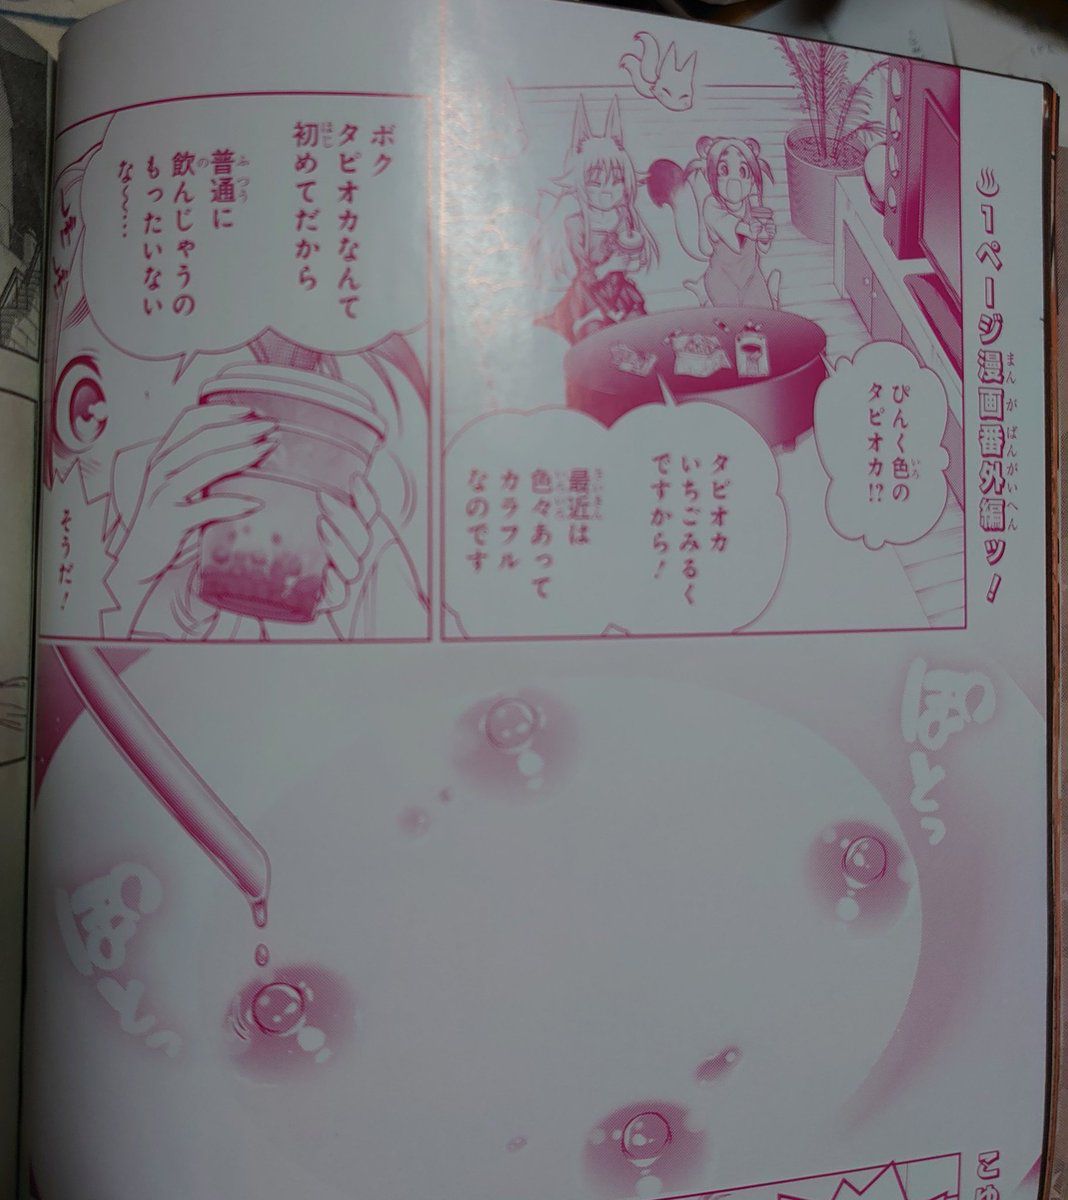 Doero manga wwww that I was able to compete with Yurina of Yuragiso only ToLOVE 13